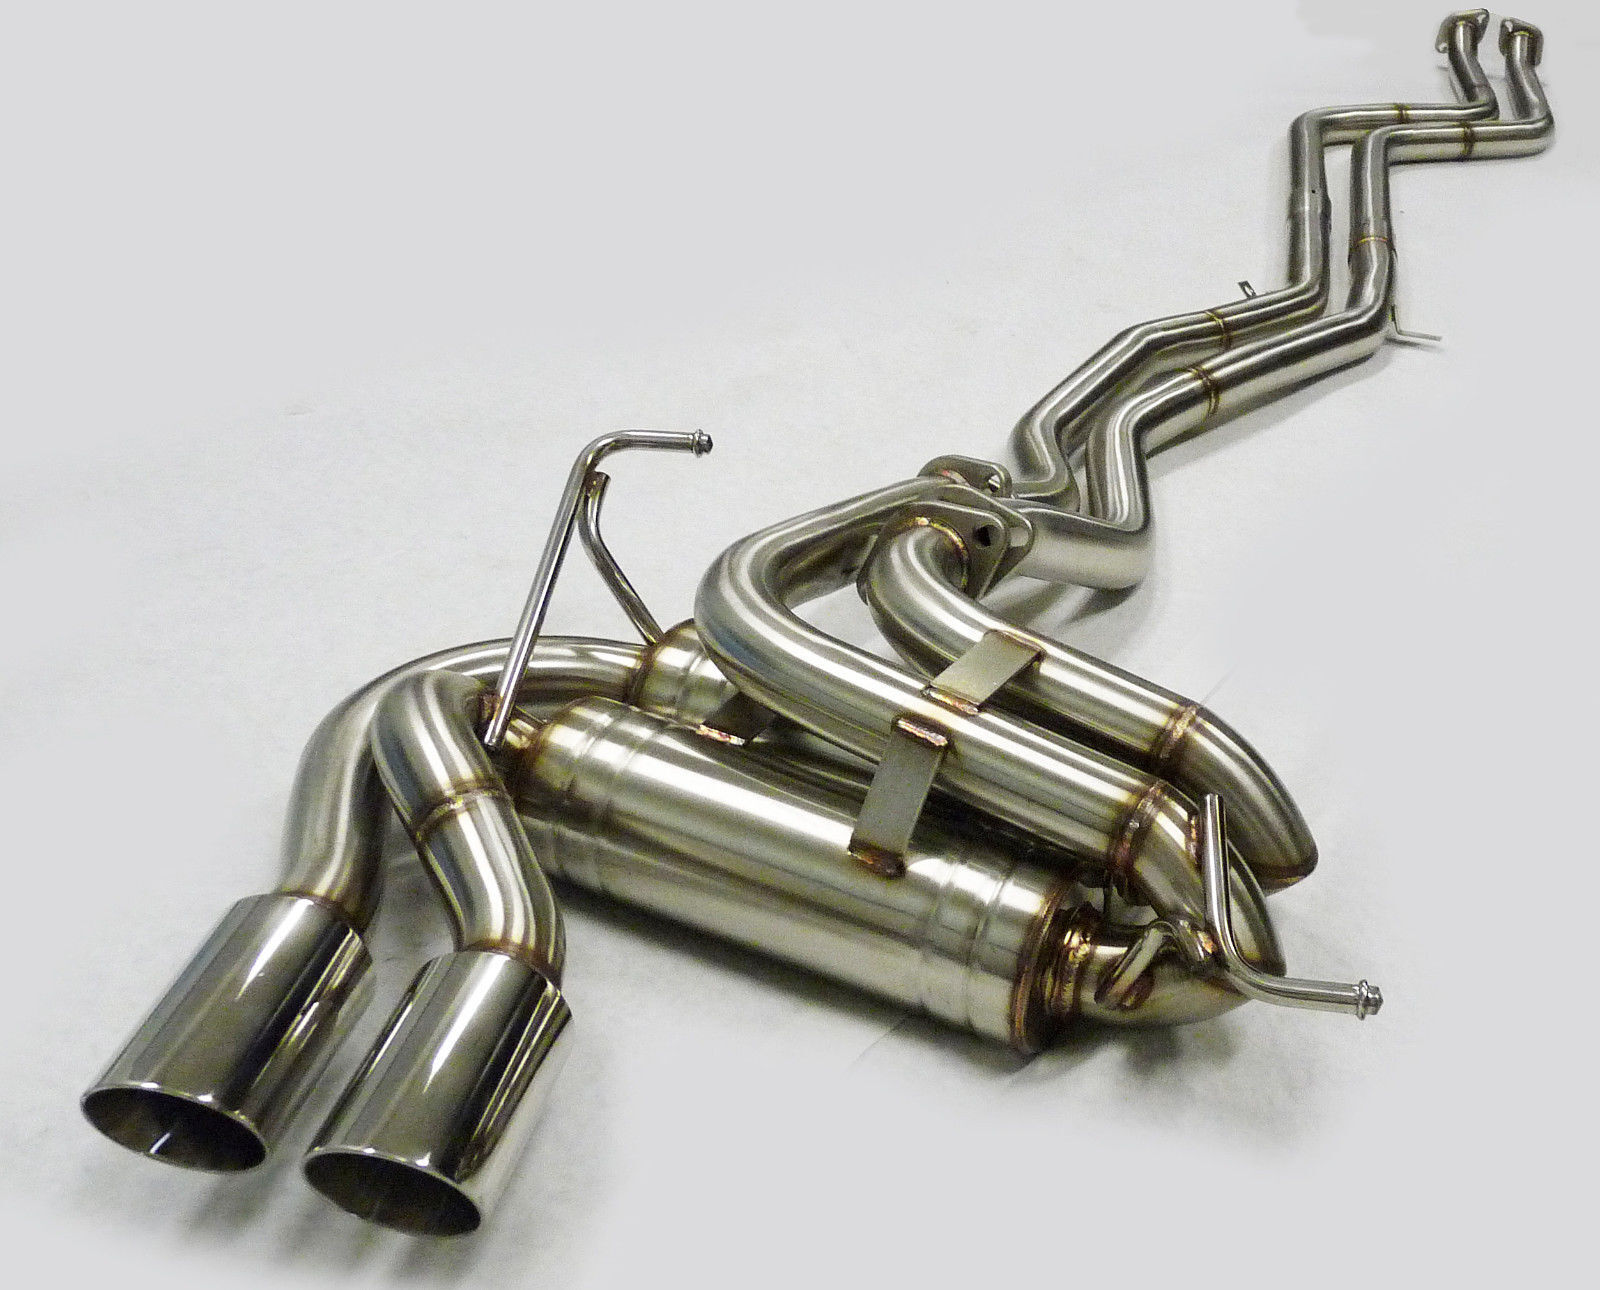 S/S Catback Exhaust For 06 to 08 BMW Z4 E85/N52 3.0L (Flanges Inward) By Becker 